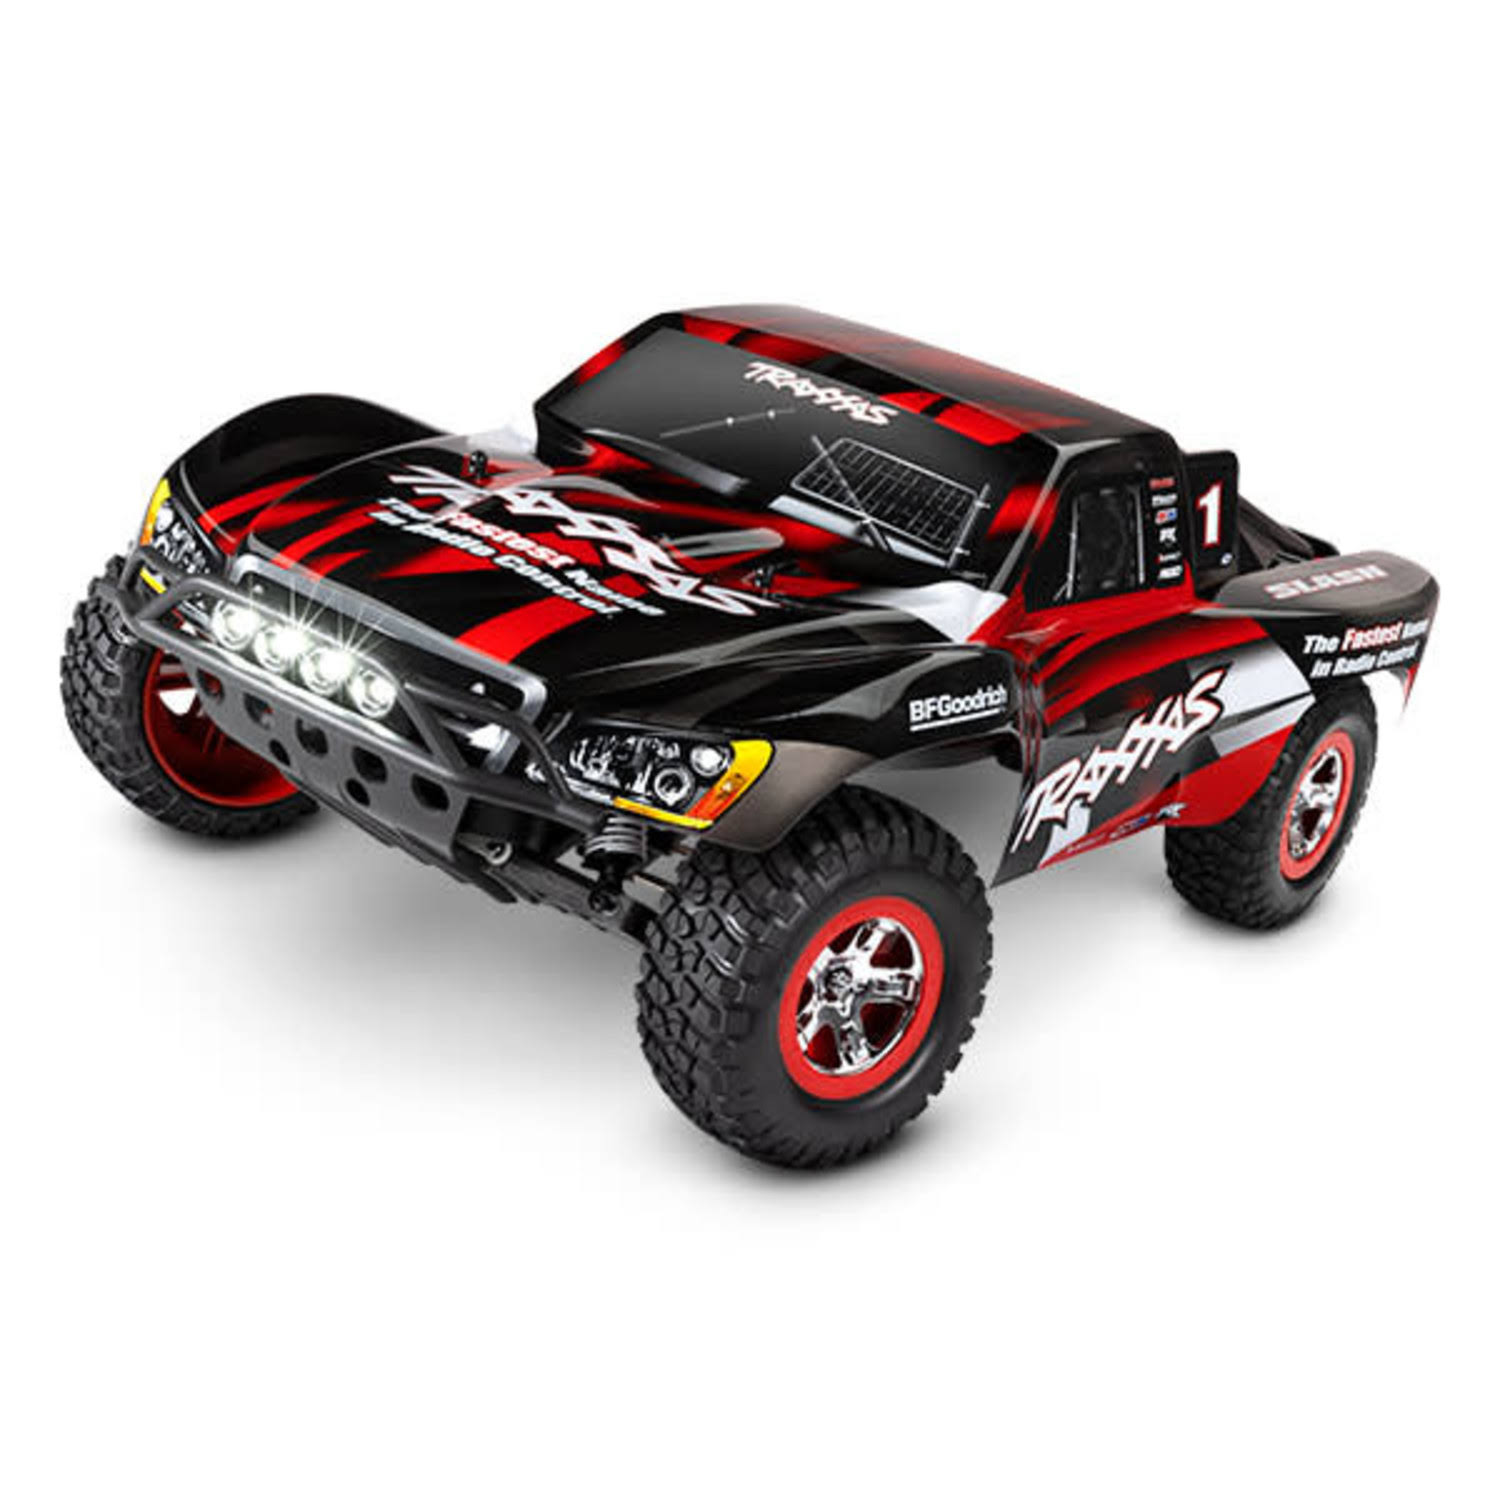 Traxxas 1/10 Slash 2WD RTR Short-Course Race Truck with Lights - Red